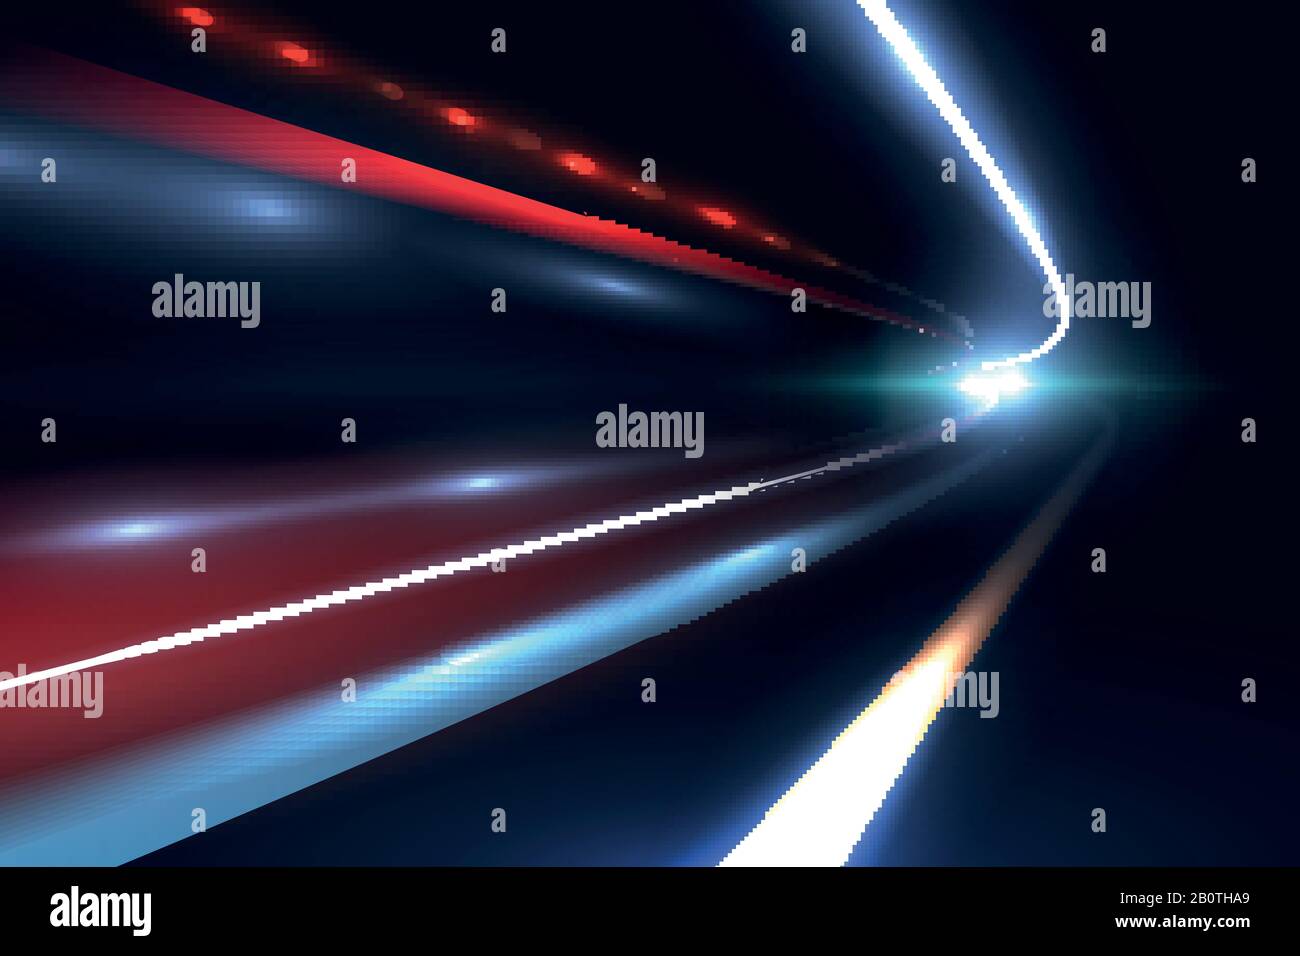 Car speed lines. Light trails tragic of long exposure abstract vector background. Light night road tunnel for car or train illustration Stock Vector